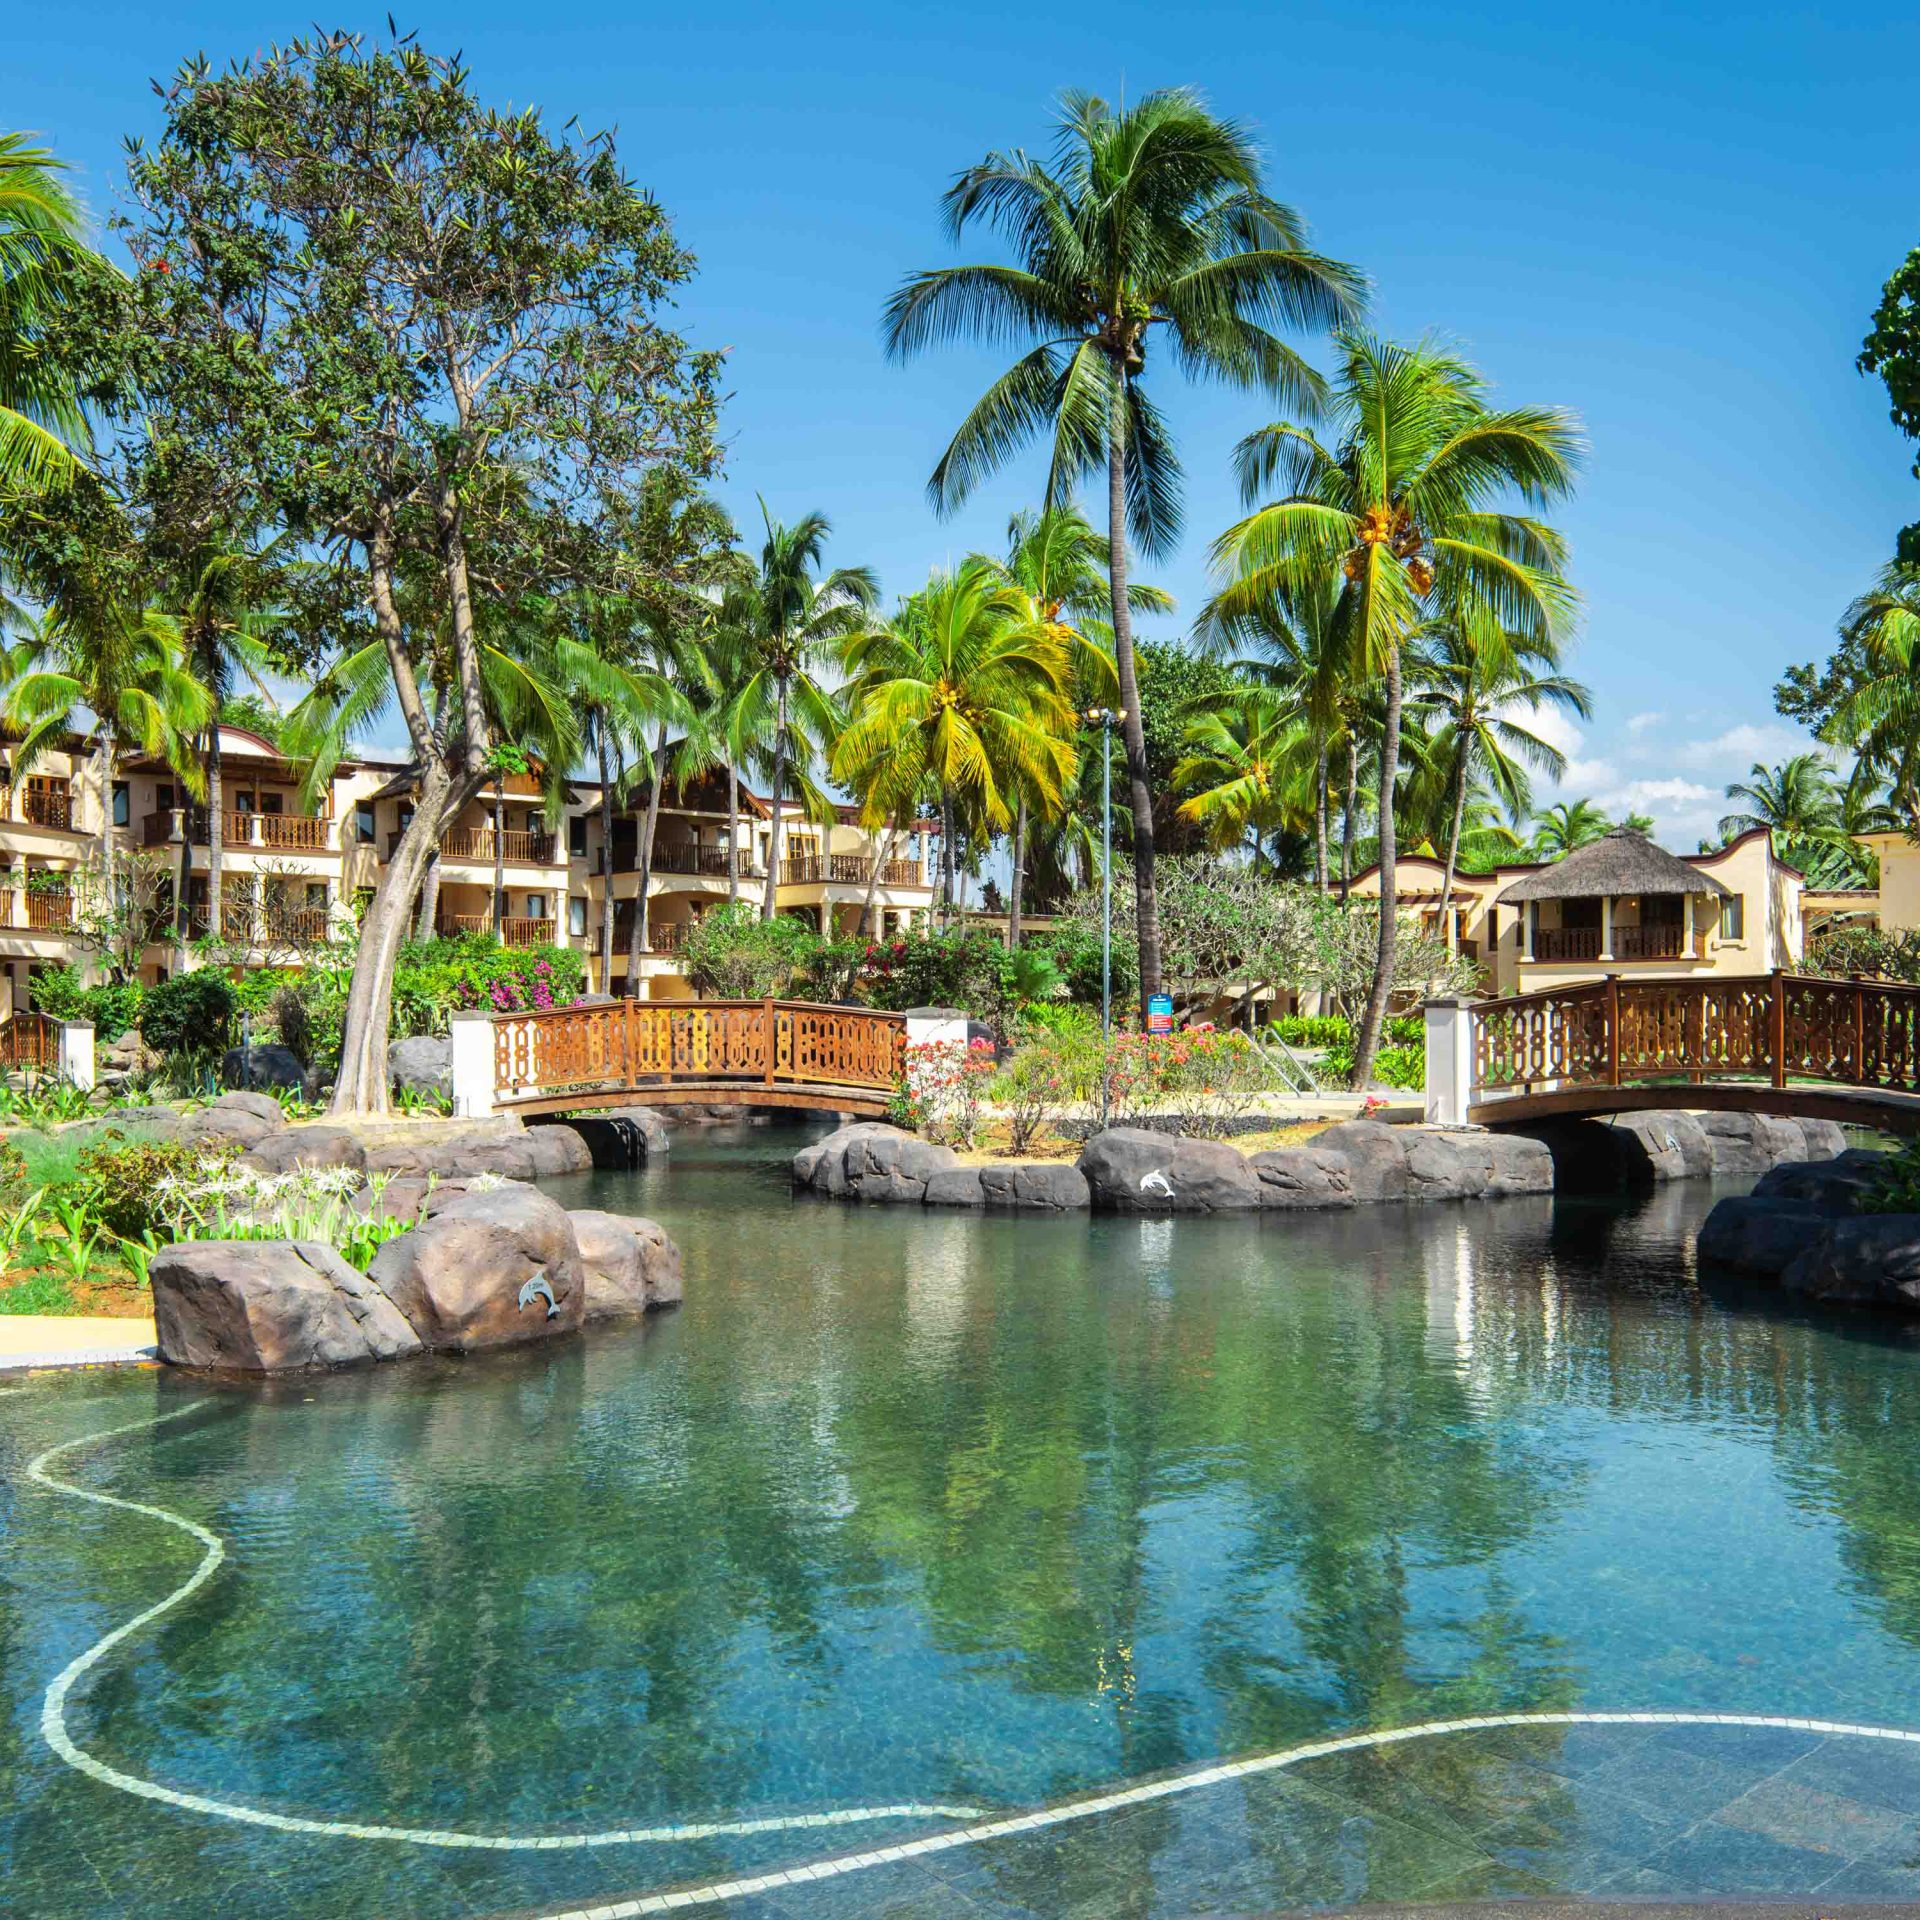 Hilton Mauritius Resort & Spa - Exterior view of Hotel from Main Pool